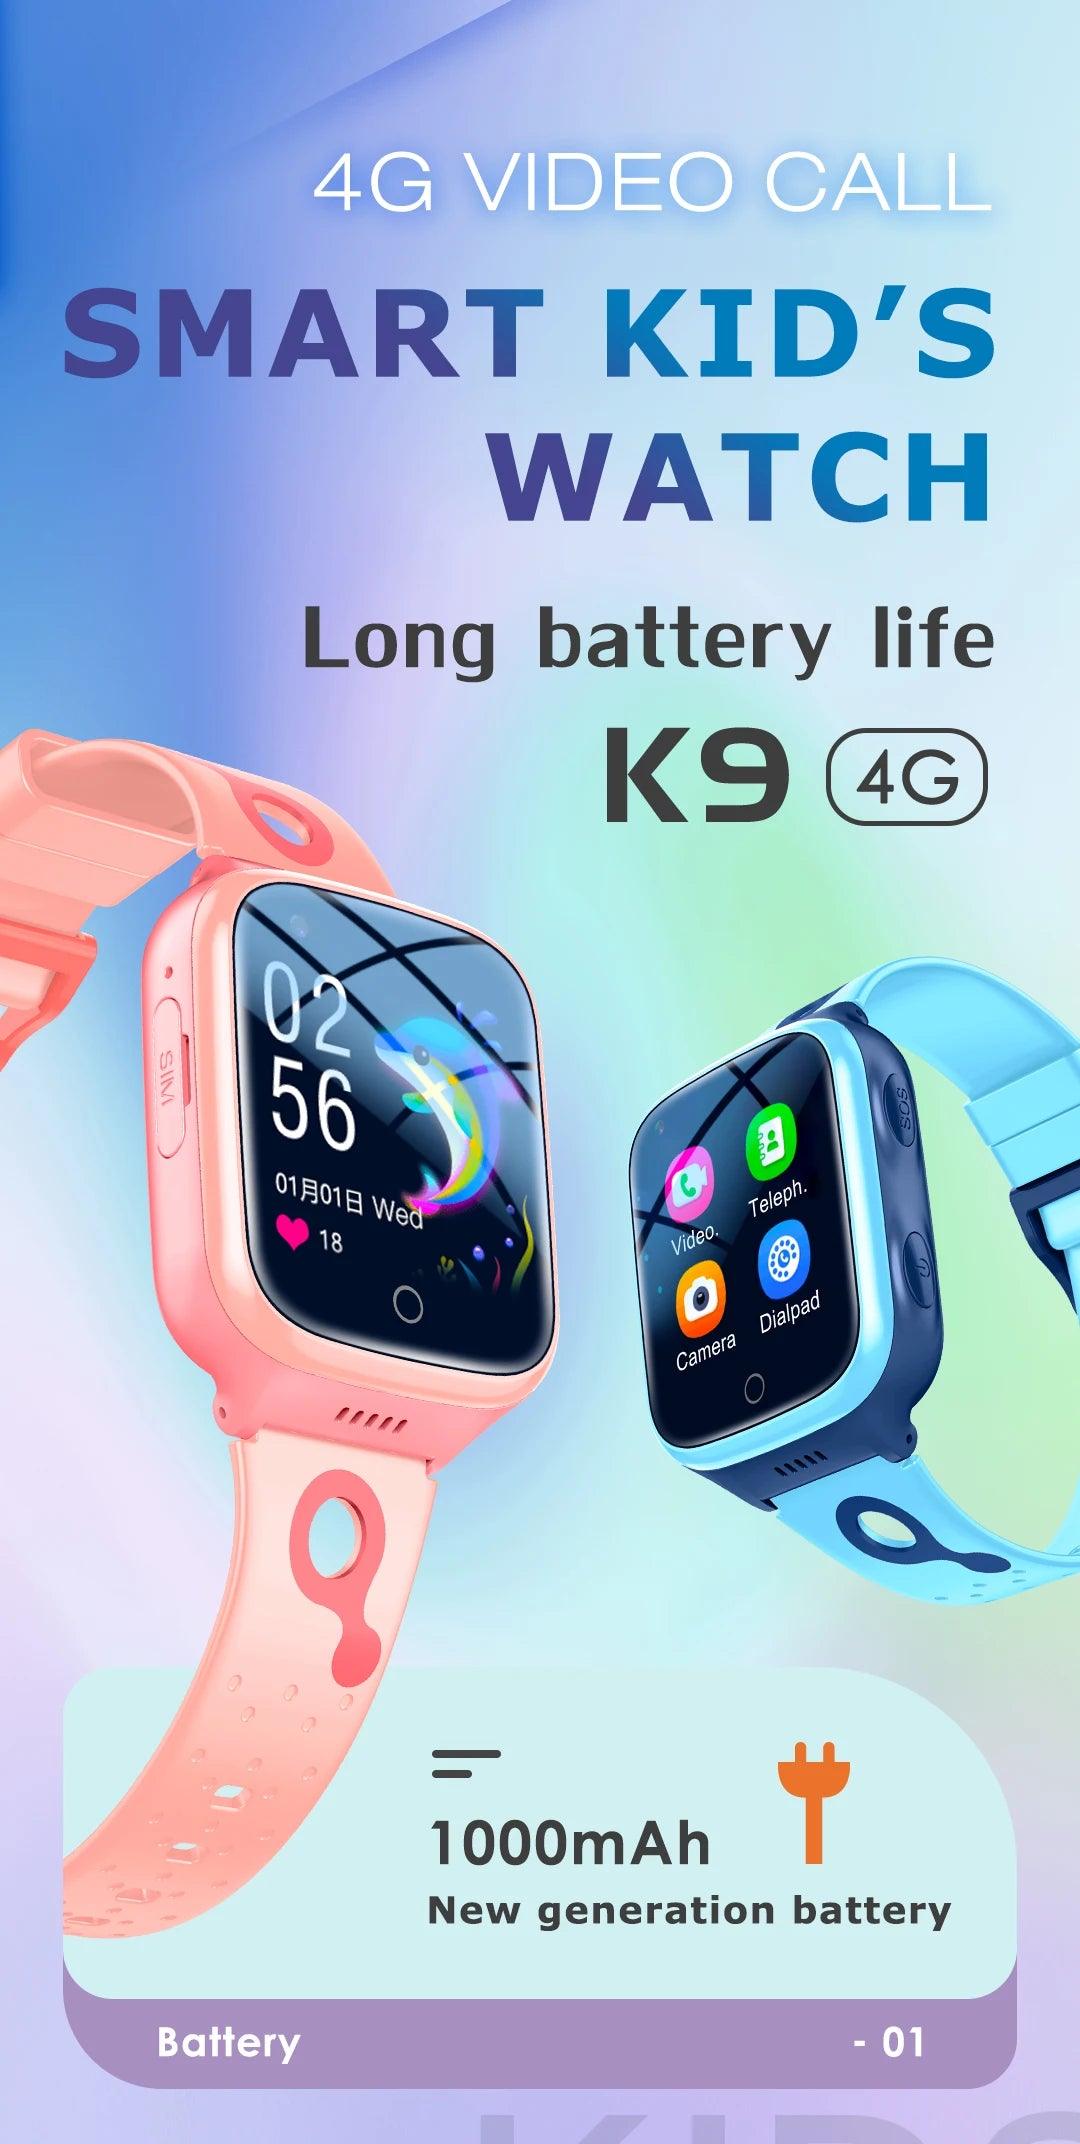 Kids 4G Smart Watch with Enhanced Connectivity & Health Monitoring  ourlum.com   